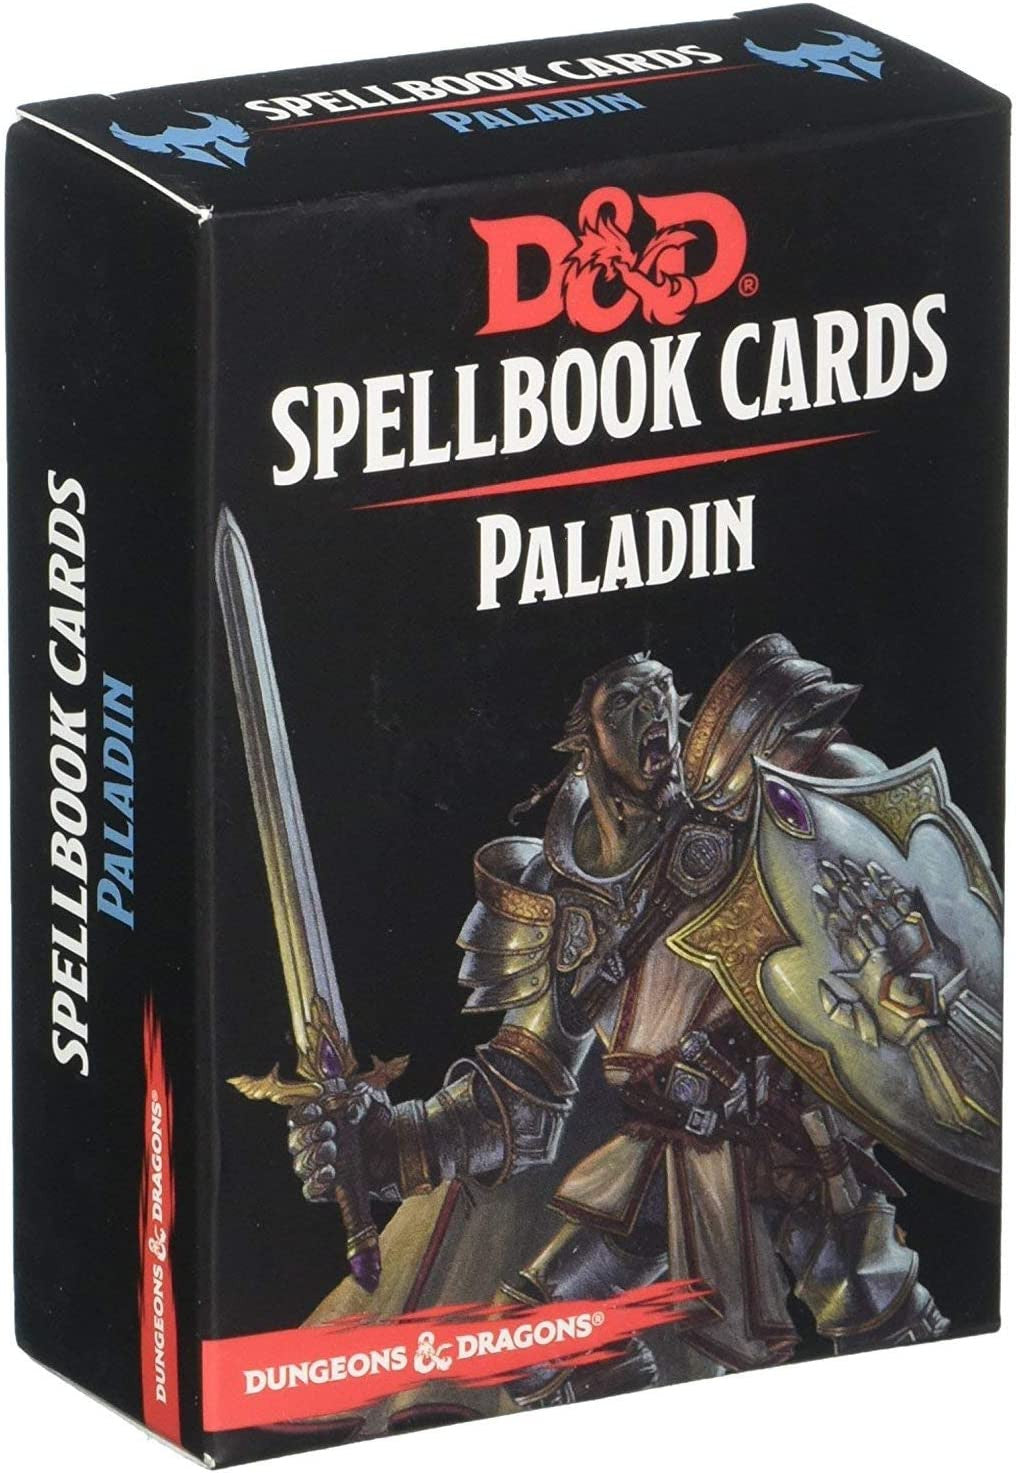 D&D Dungeons & Dragons Spellbook Cards Paladin